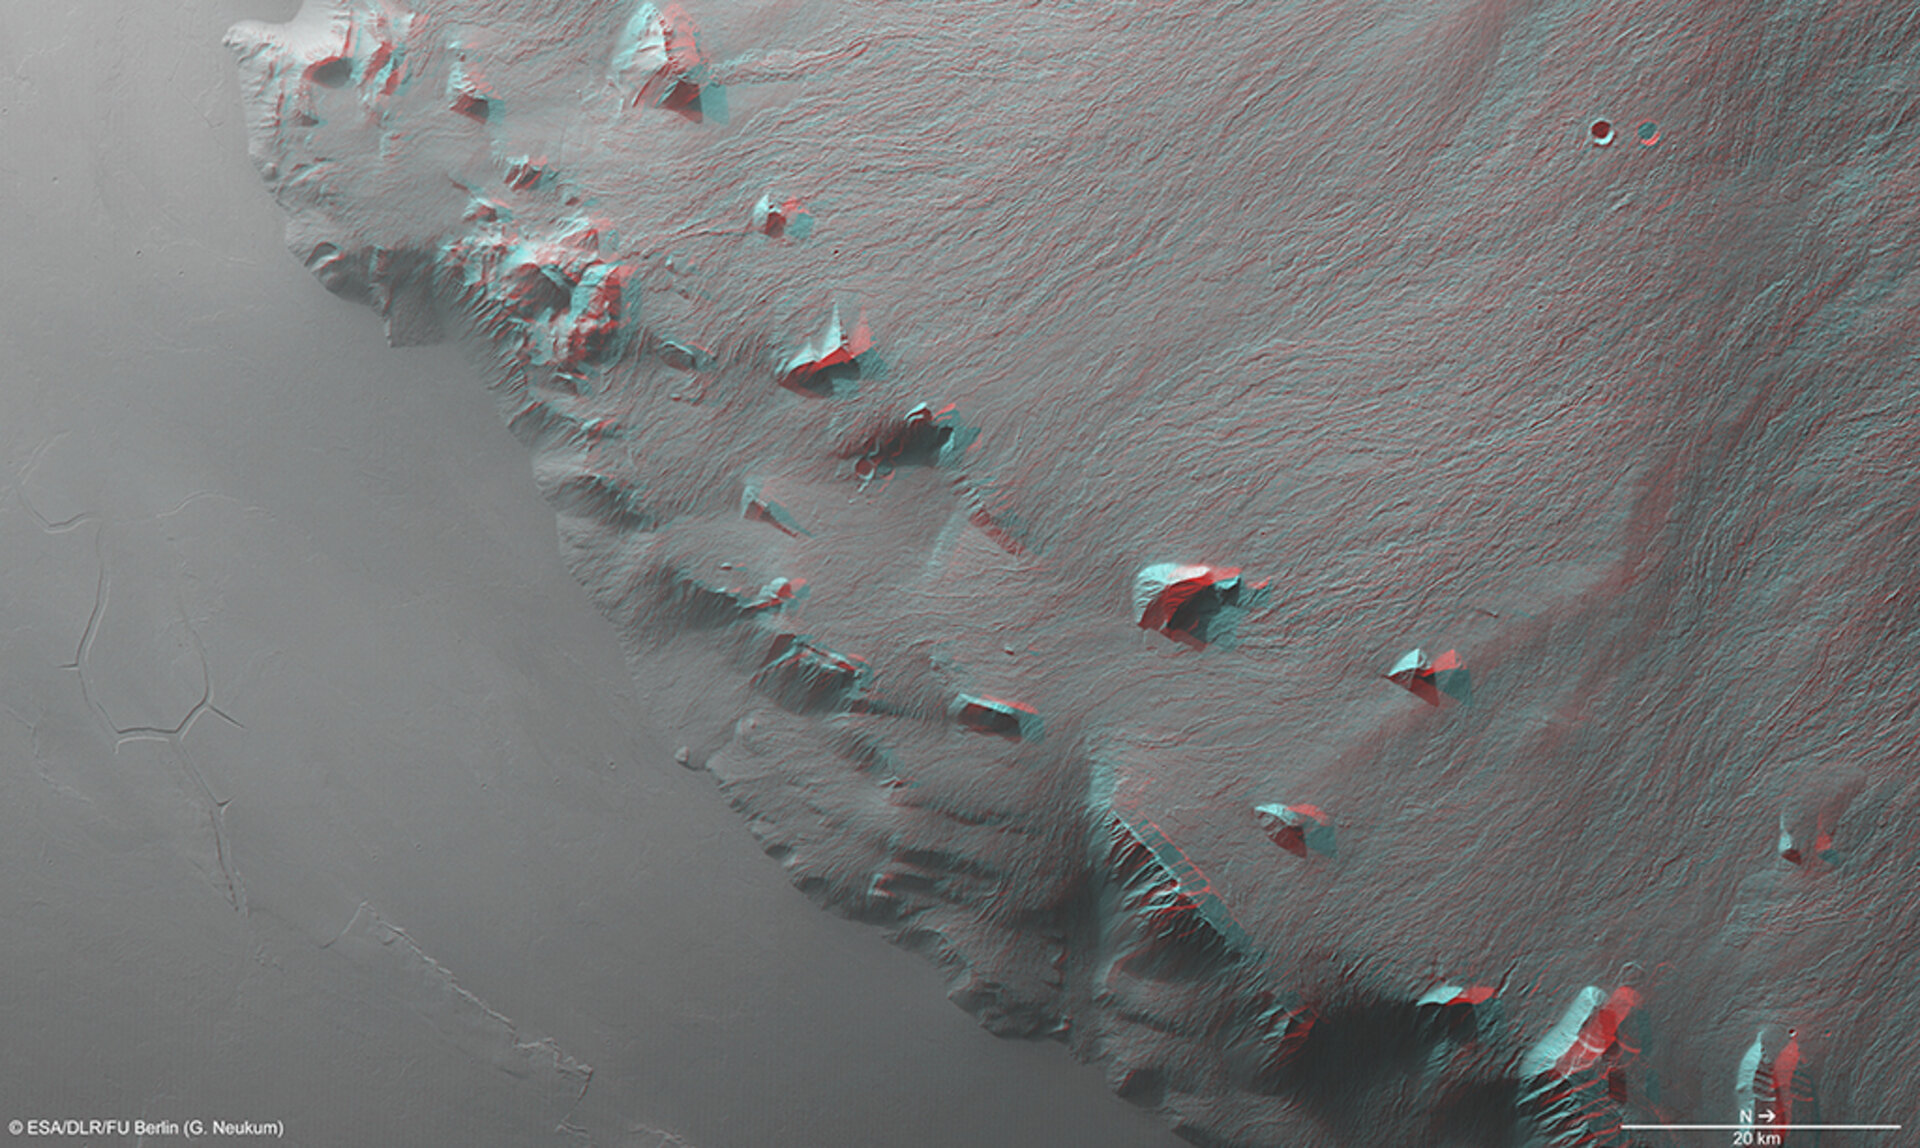 The flank of Olympus Mons in 3D